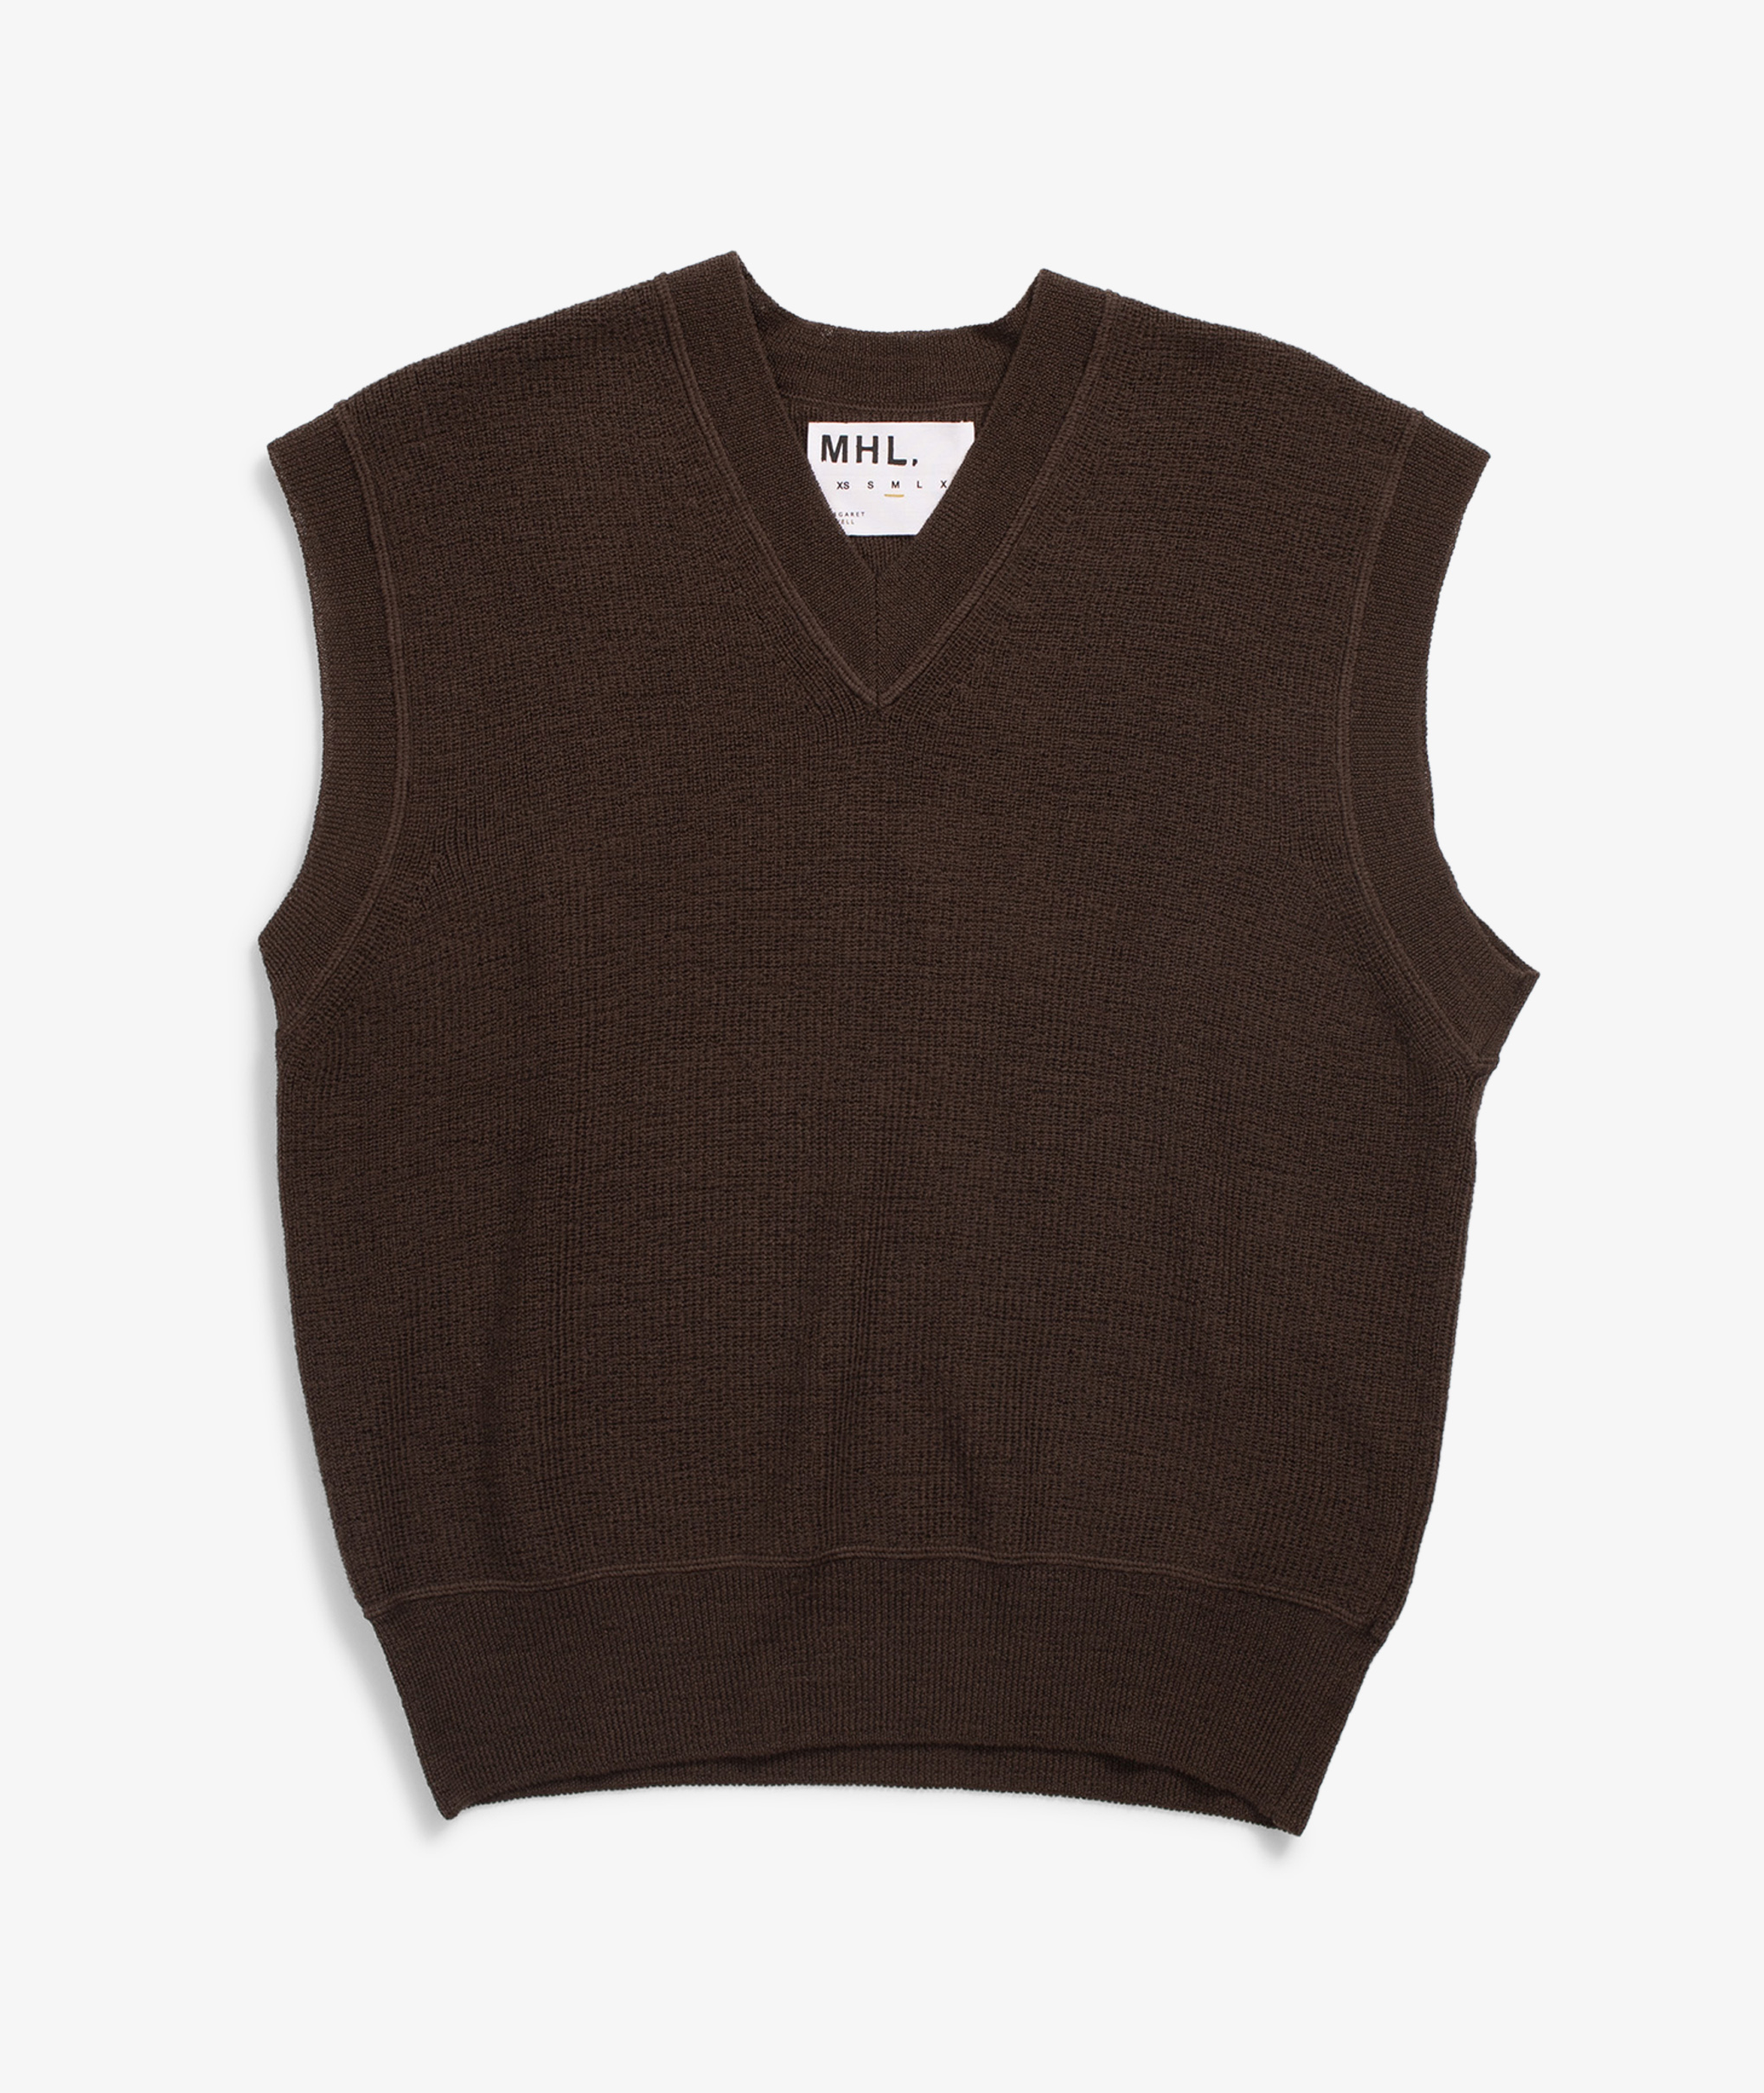 Norse Store | Shipping Worldwide - Margaret Howell MHL Ribbed 